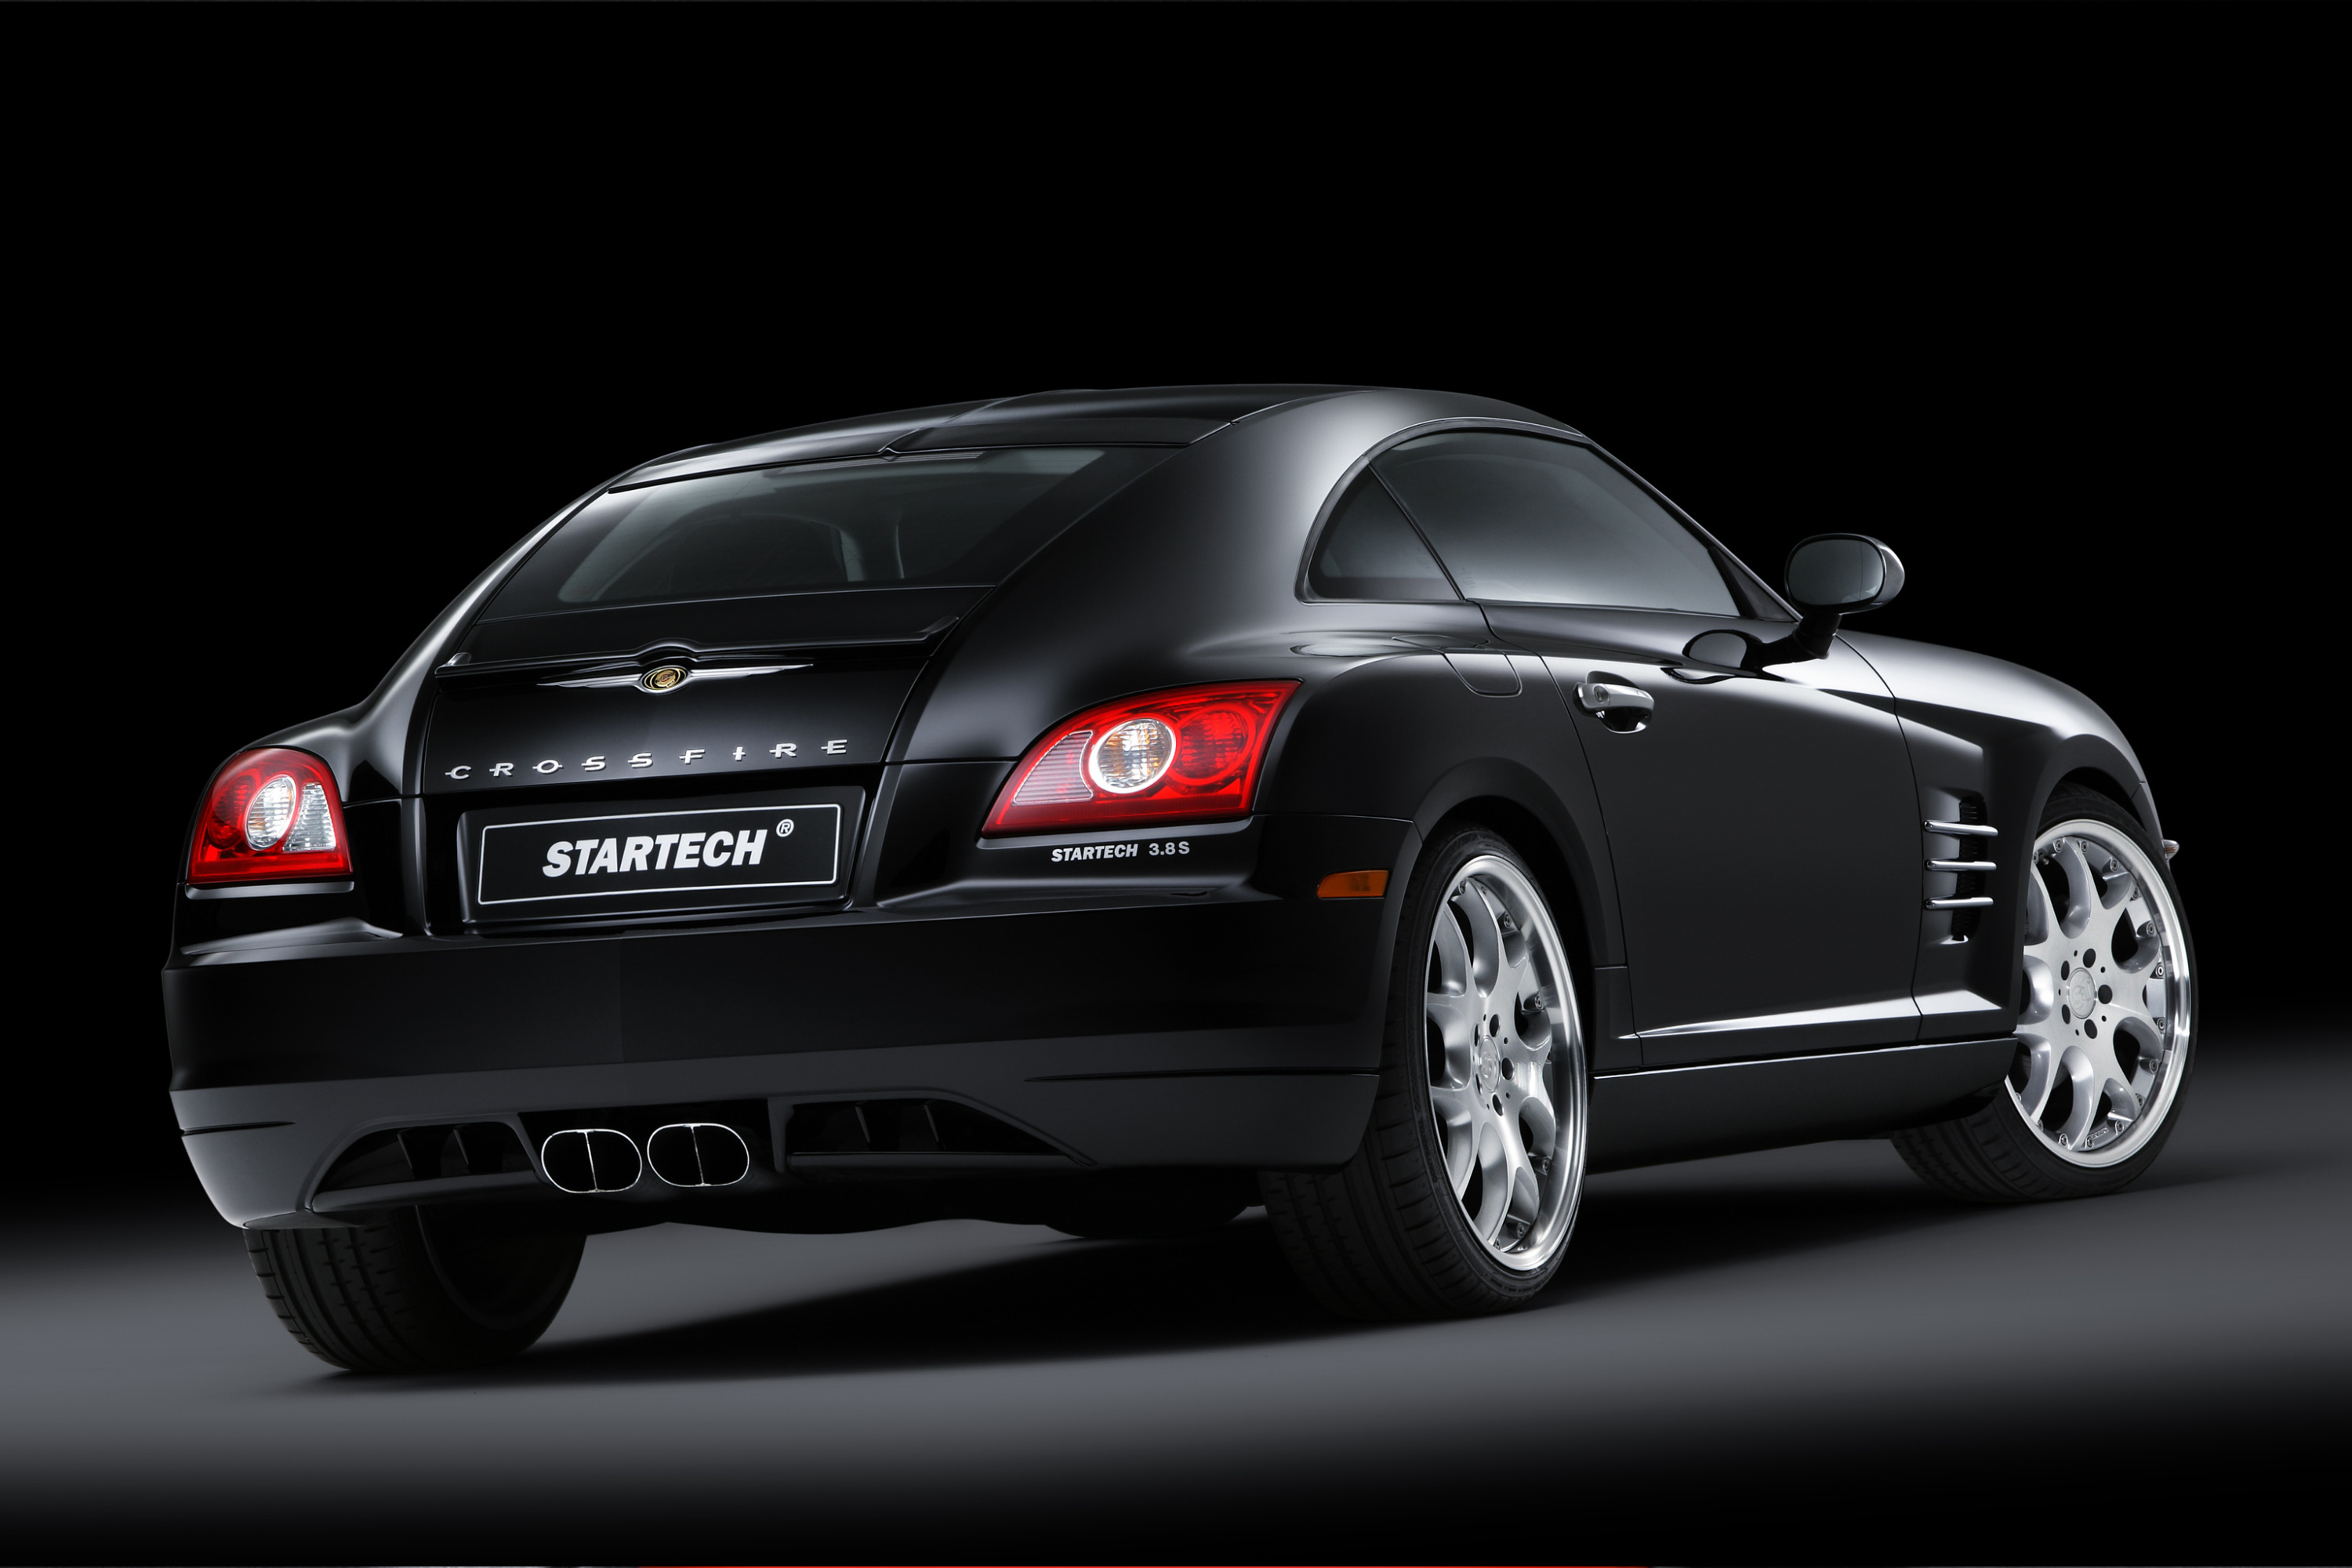 Chrysler crossfire review 2005 #1